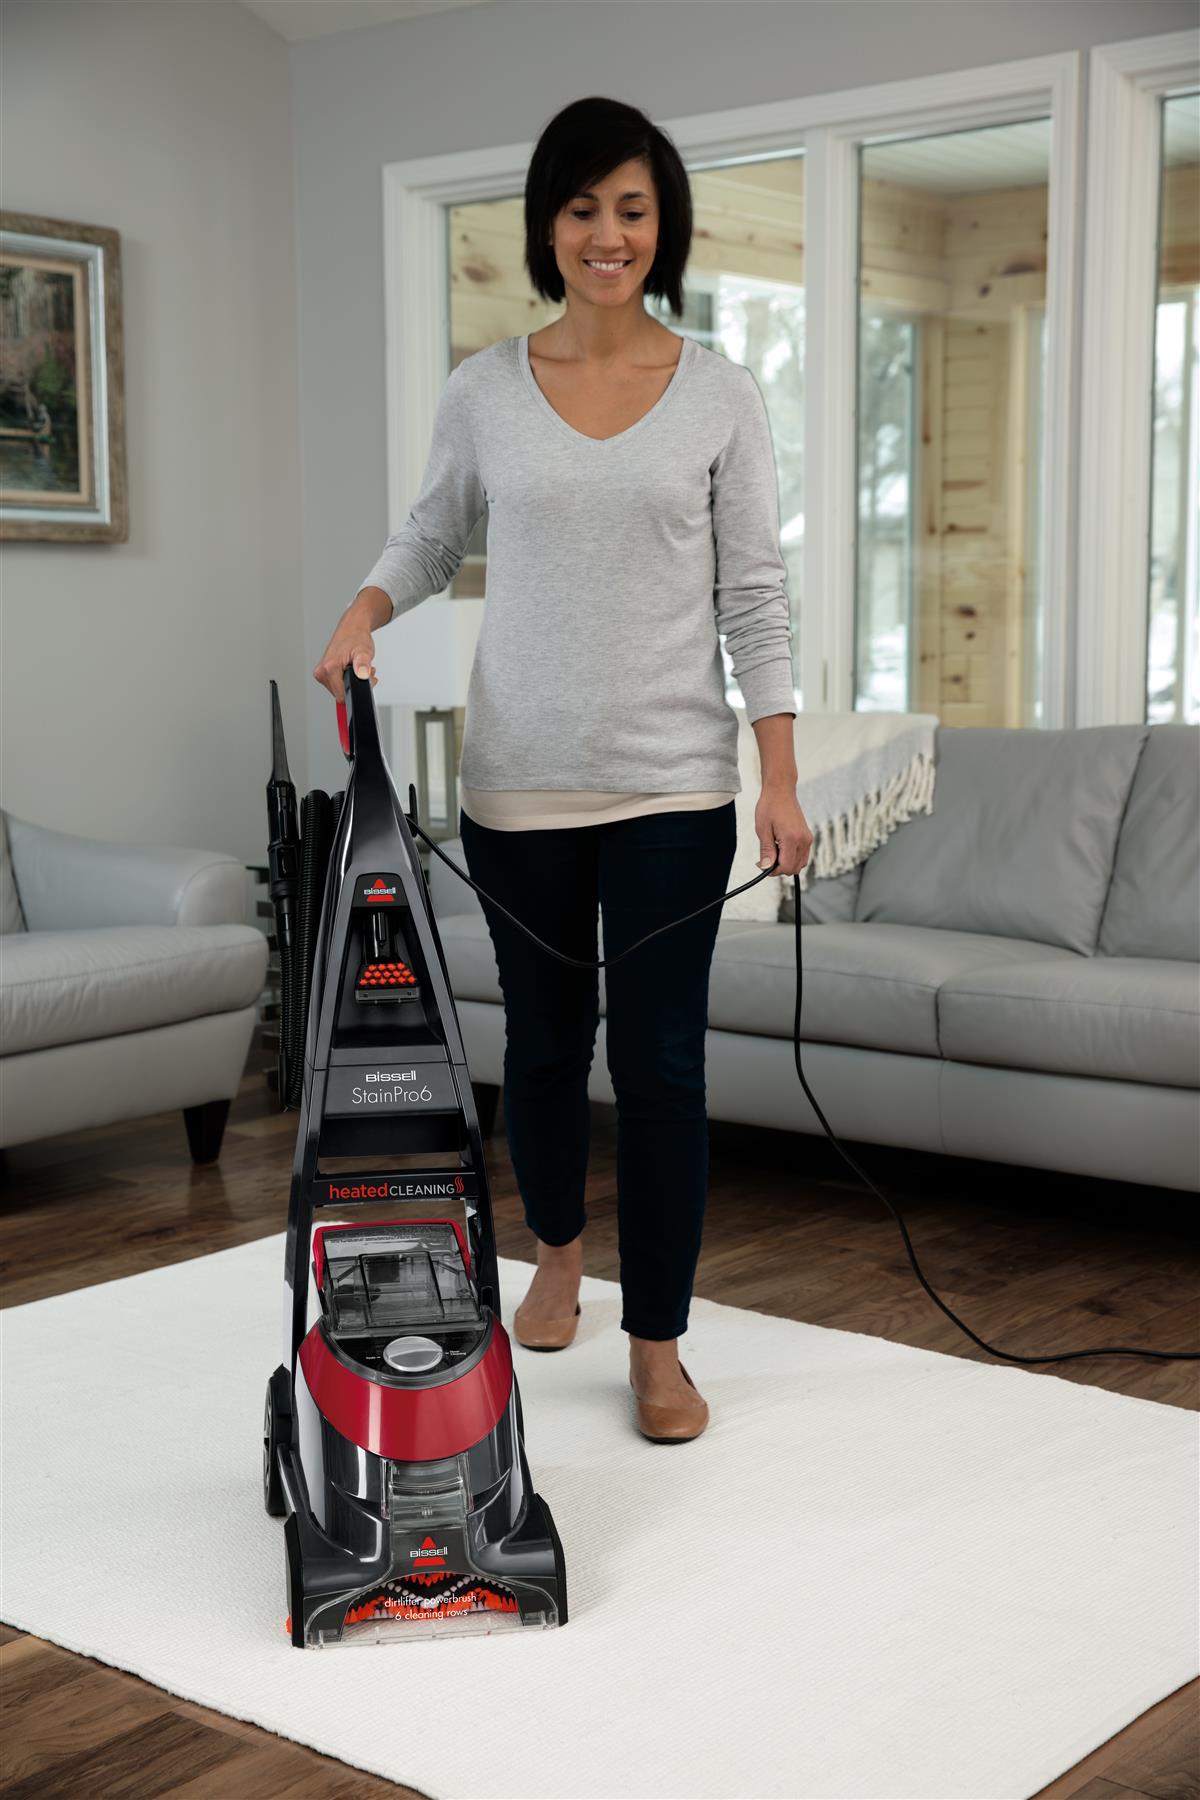 Bissell Stain Pro 6 20096 Upright Carpet Cleaner Appliance